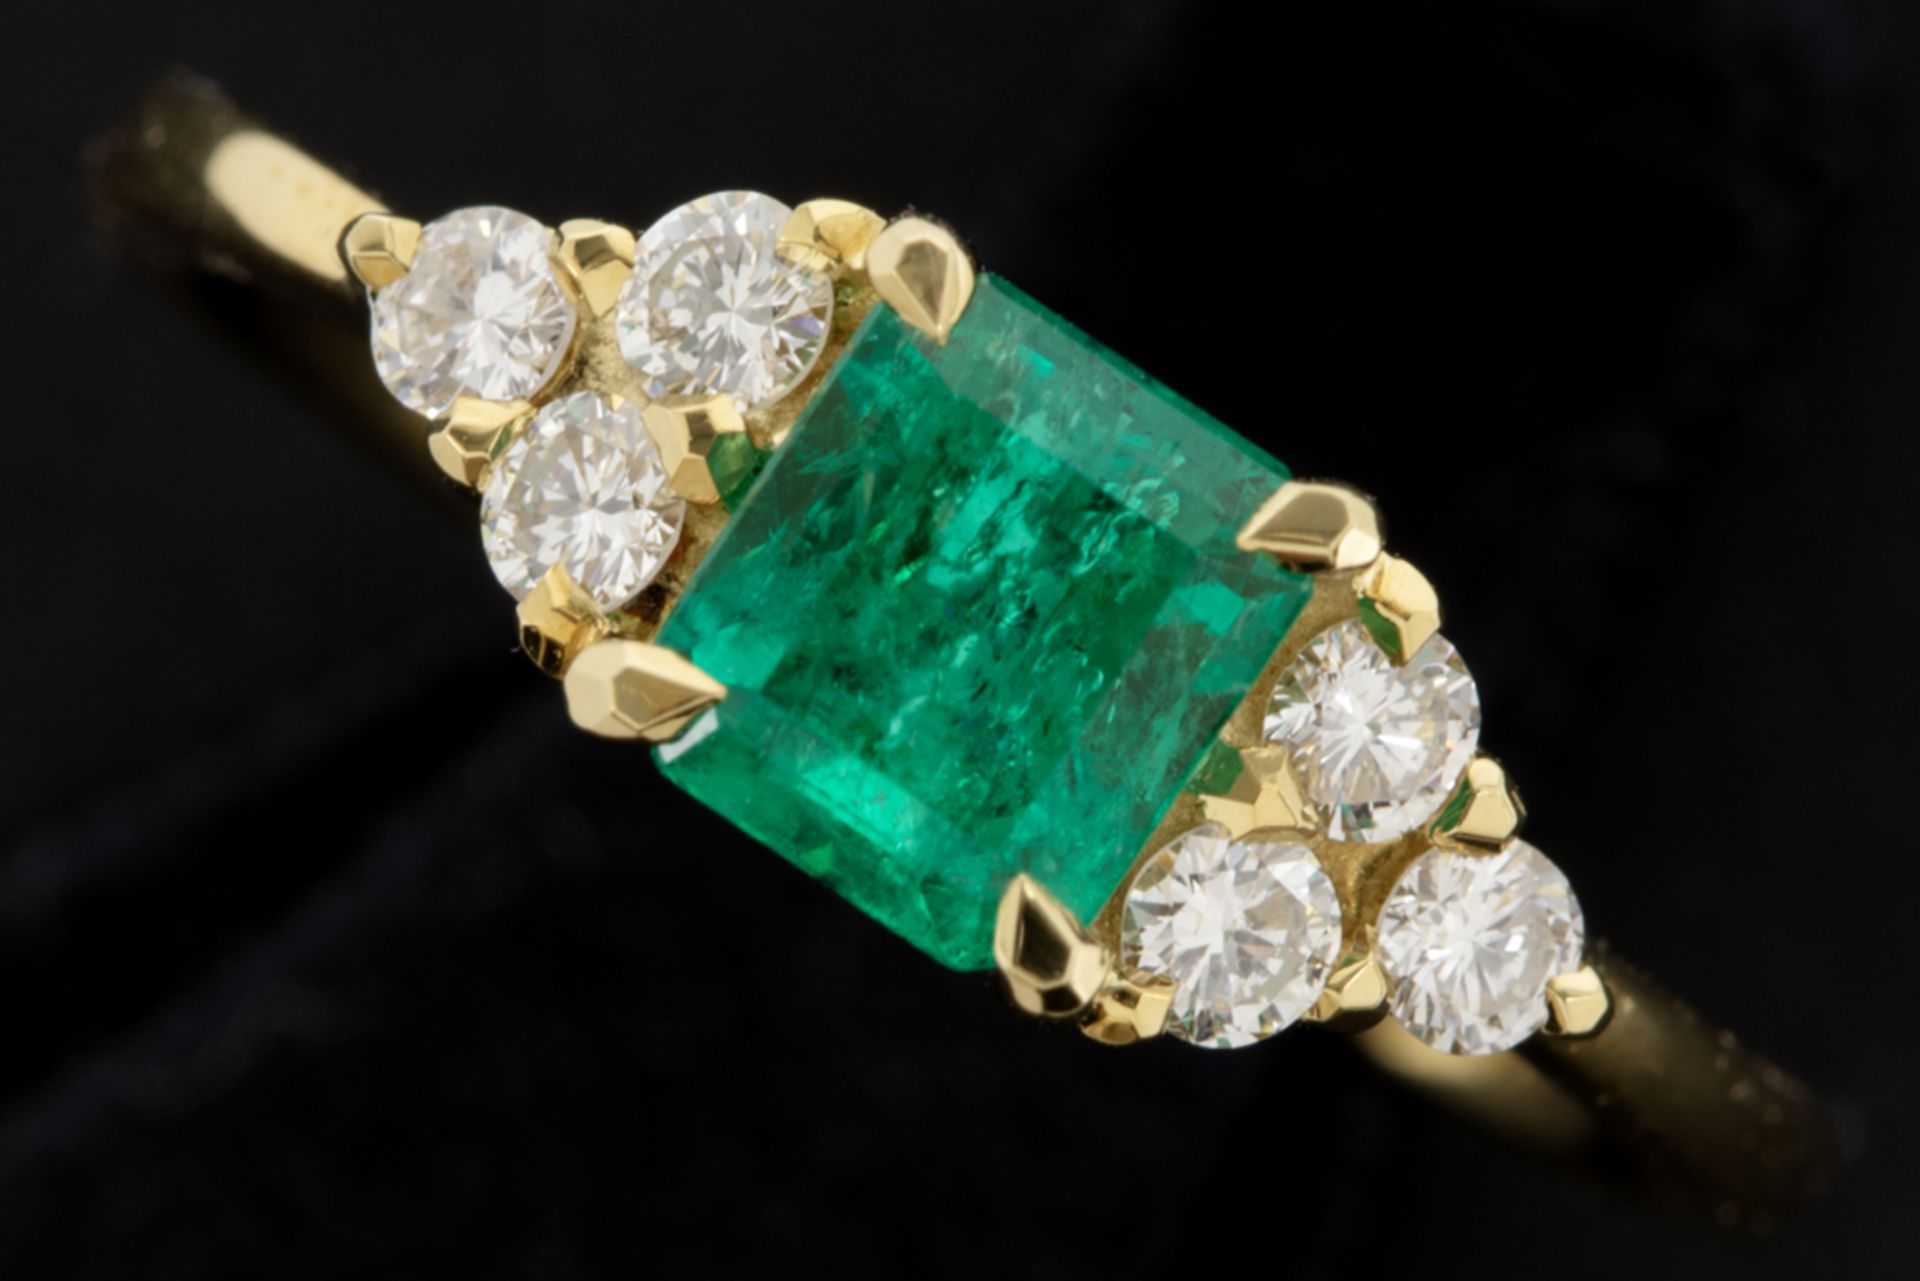 ring in yellow gold (18 carat) with a 0,80 carat "transparent vivid green" emerald and 0,22 carat of